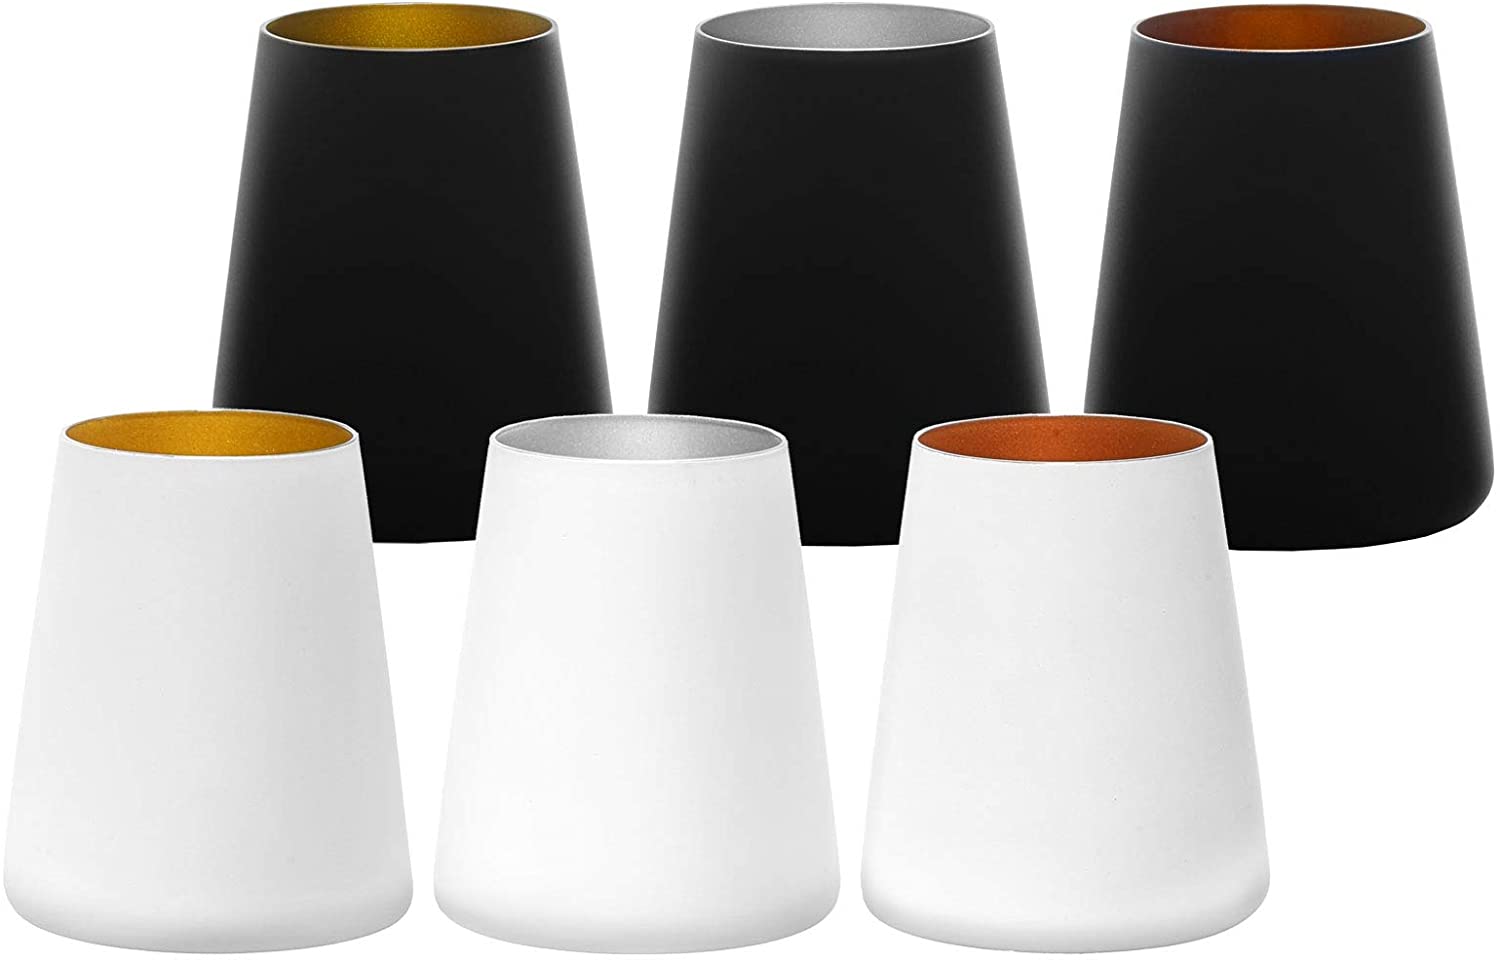 Stölzle Lausitz Mugs Power 380 ml Set of 6 in White and Black (Matte) Universal Use for Water, Juices, Wine, Cocktails, Dishwasher Safe, Sprayed with Organic Colours